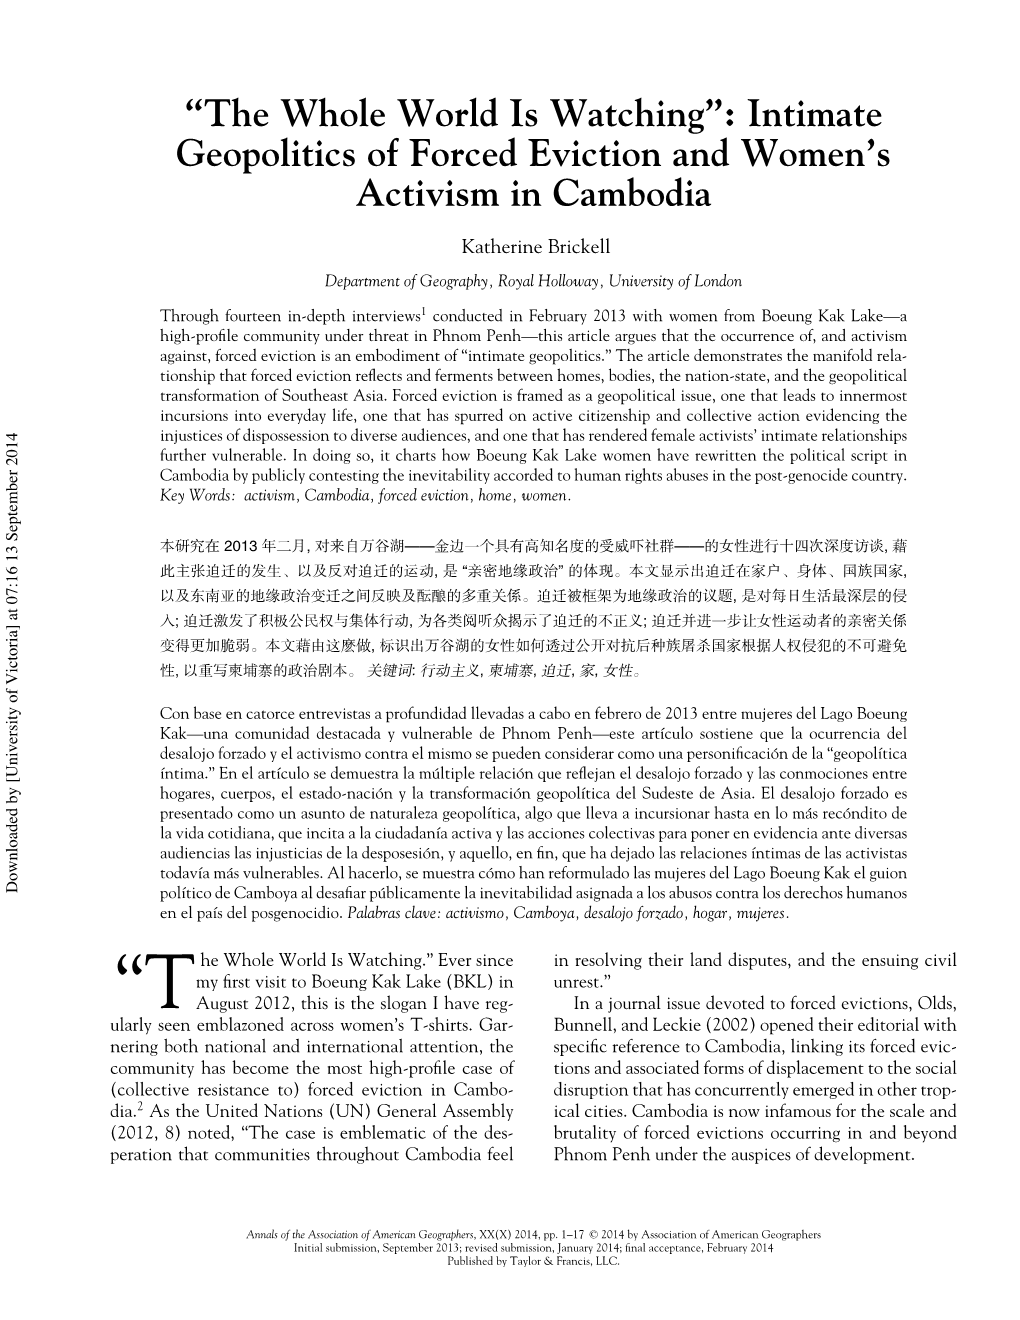 “The Whole World Is Watching”: Intimate Geopolitics of Forced Eviction and Women's Activism in Cambodia